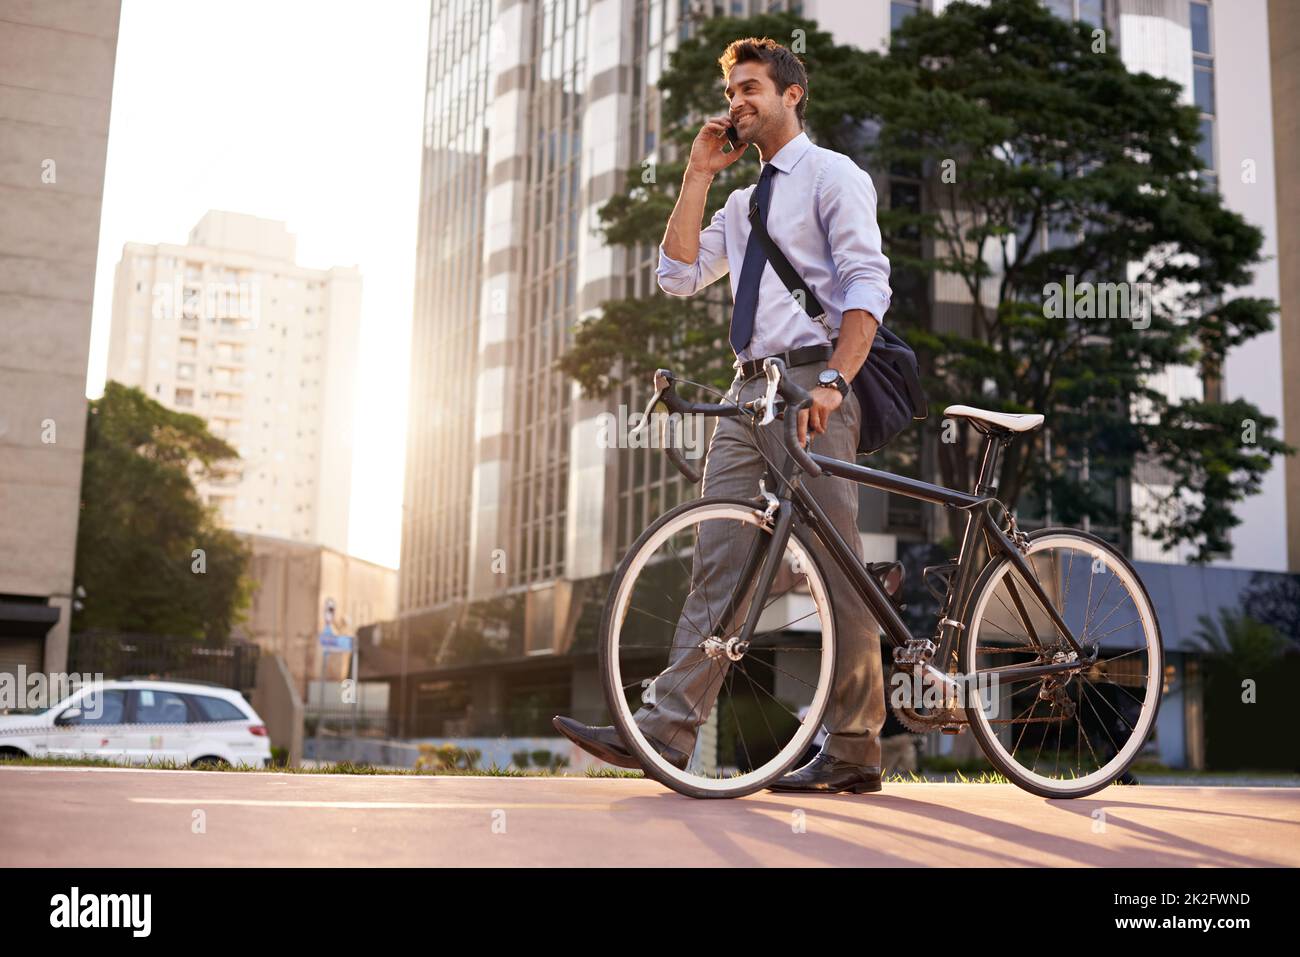 Business on the go. Shot of a businessman taking a phone call while commuting to work with his bicycle. Stock Photo